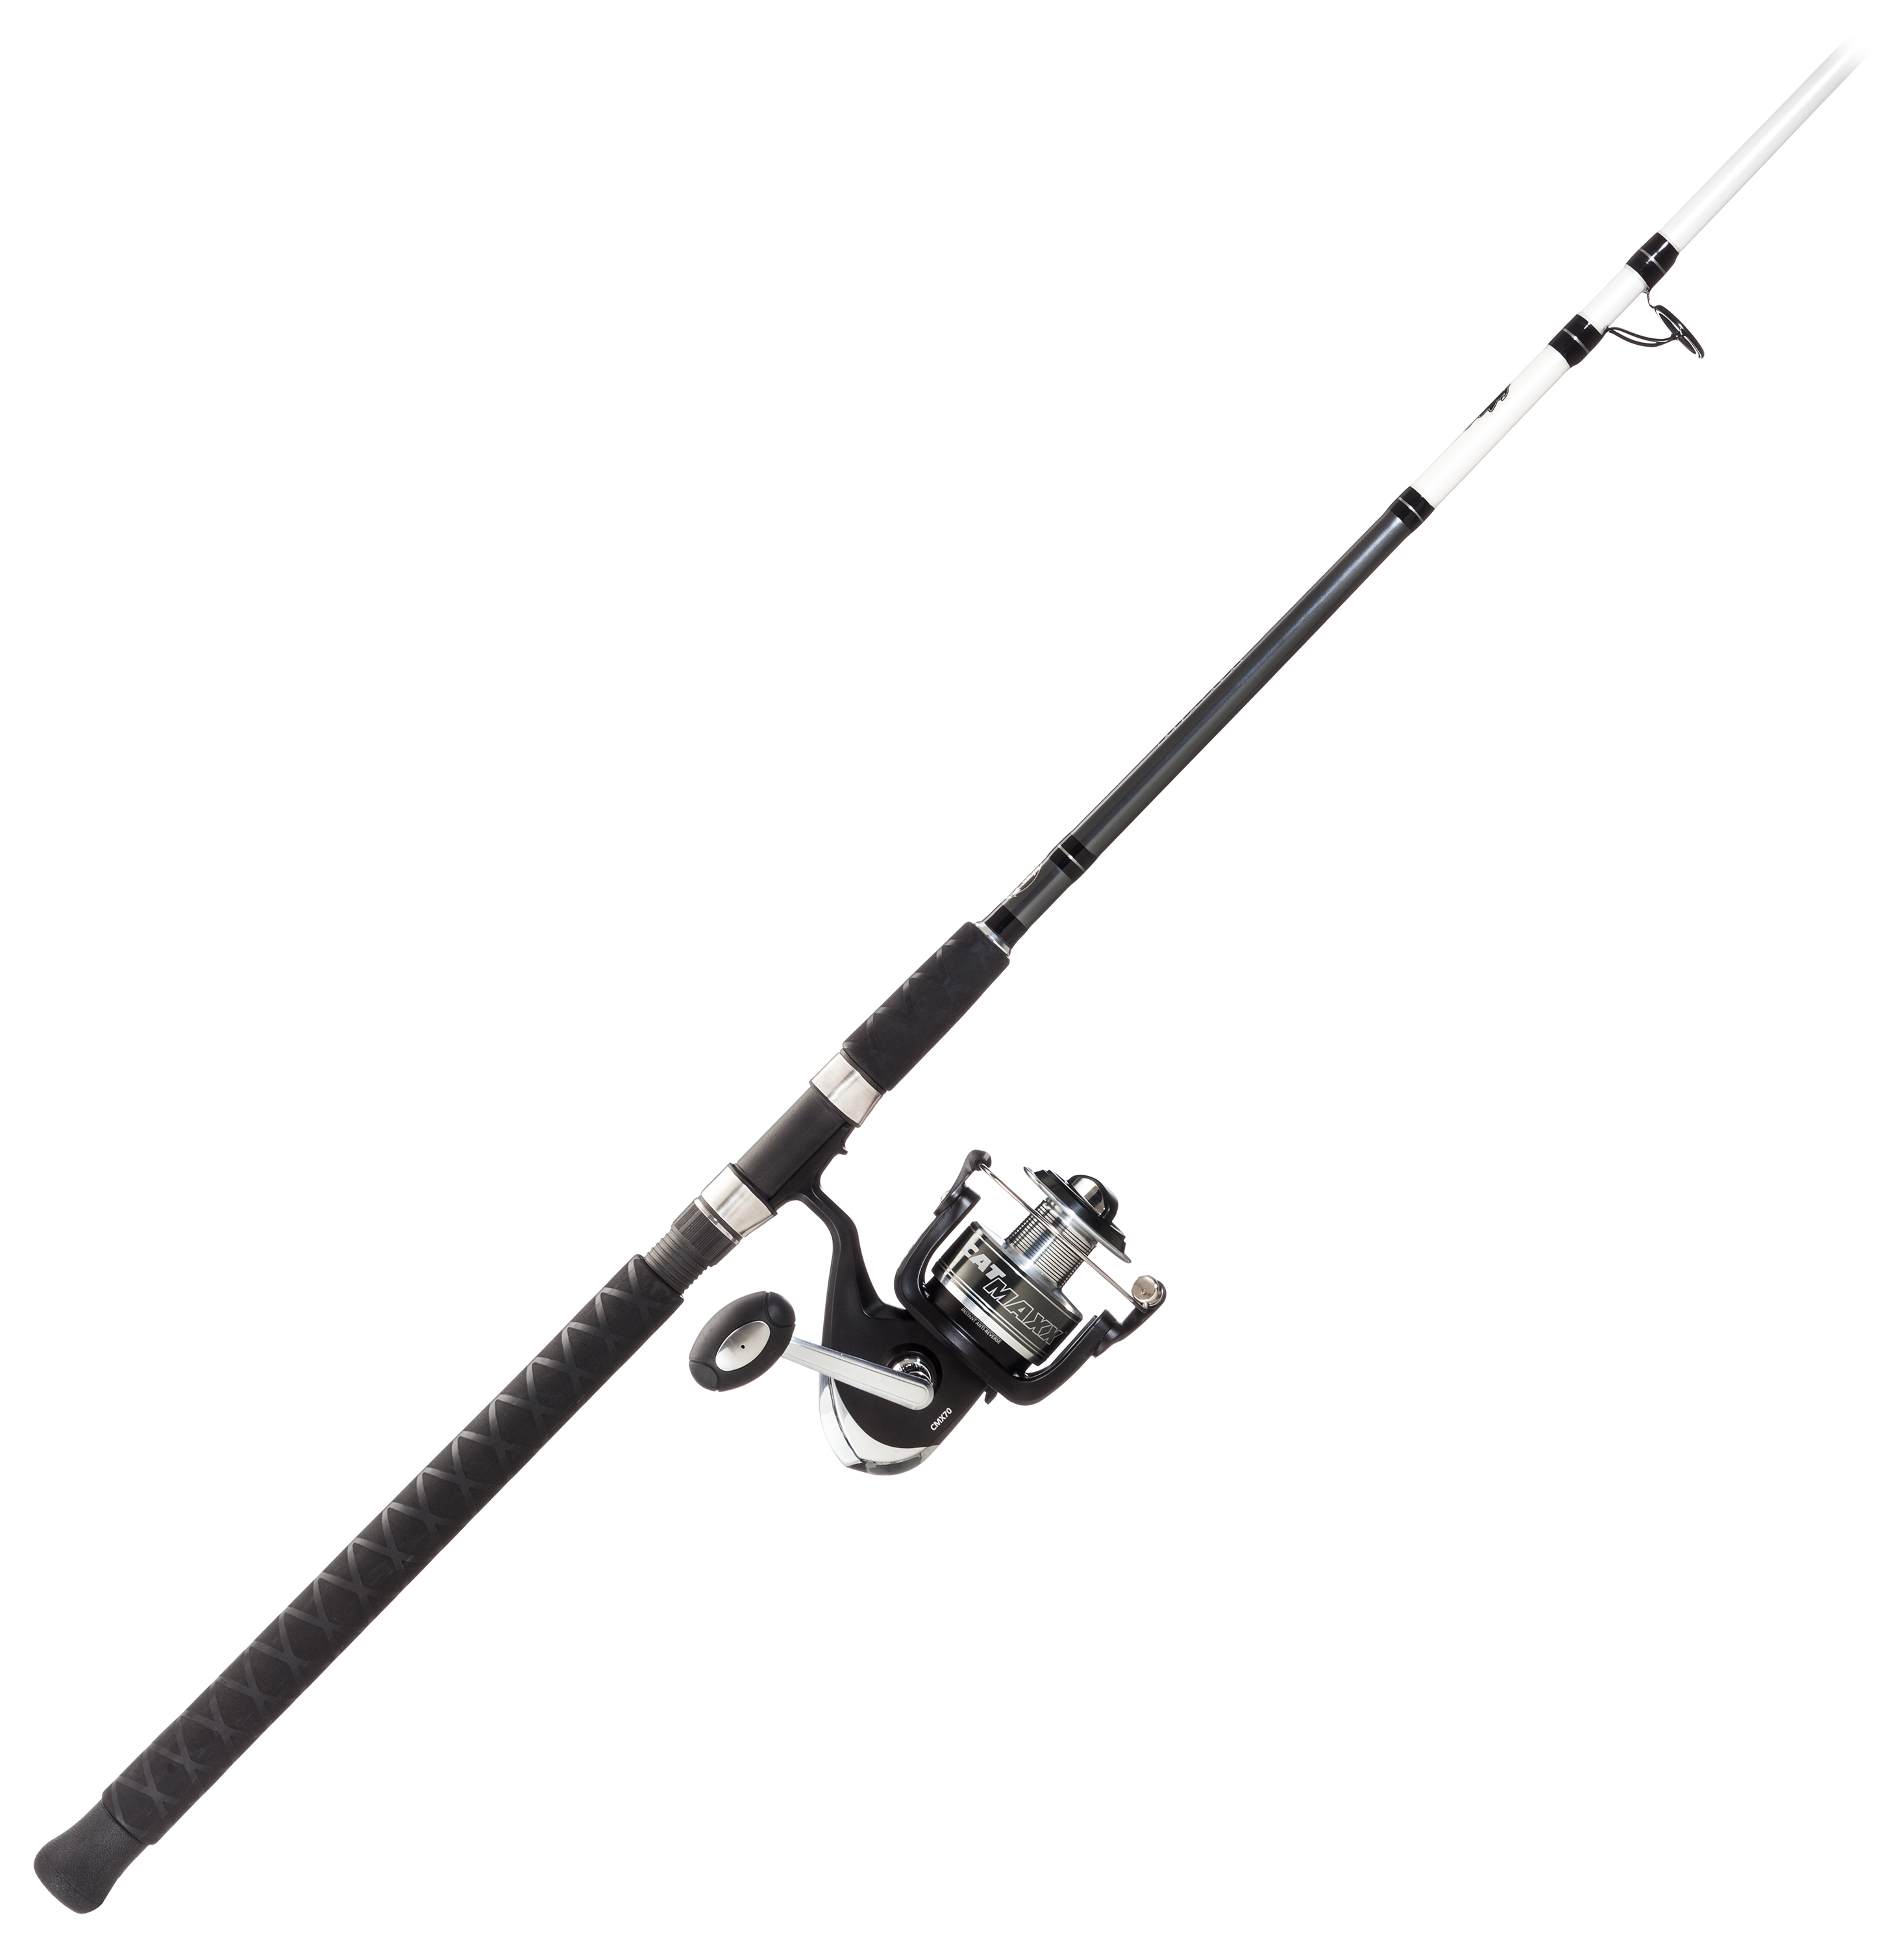 Bass Pro Shops CatMaxx Rod and Reel Spinning Combo